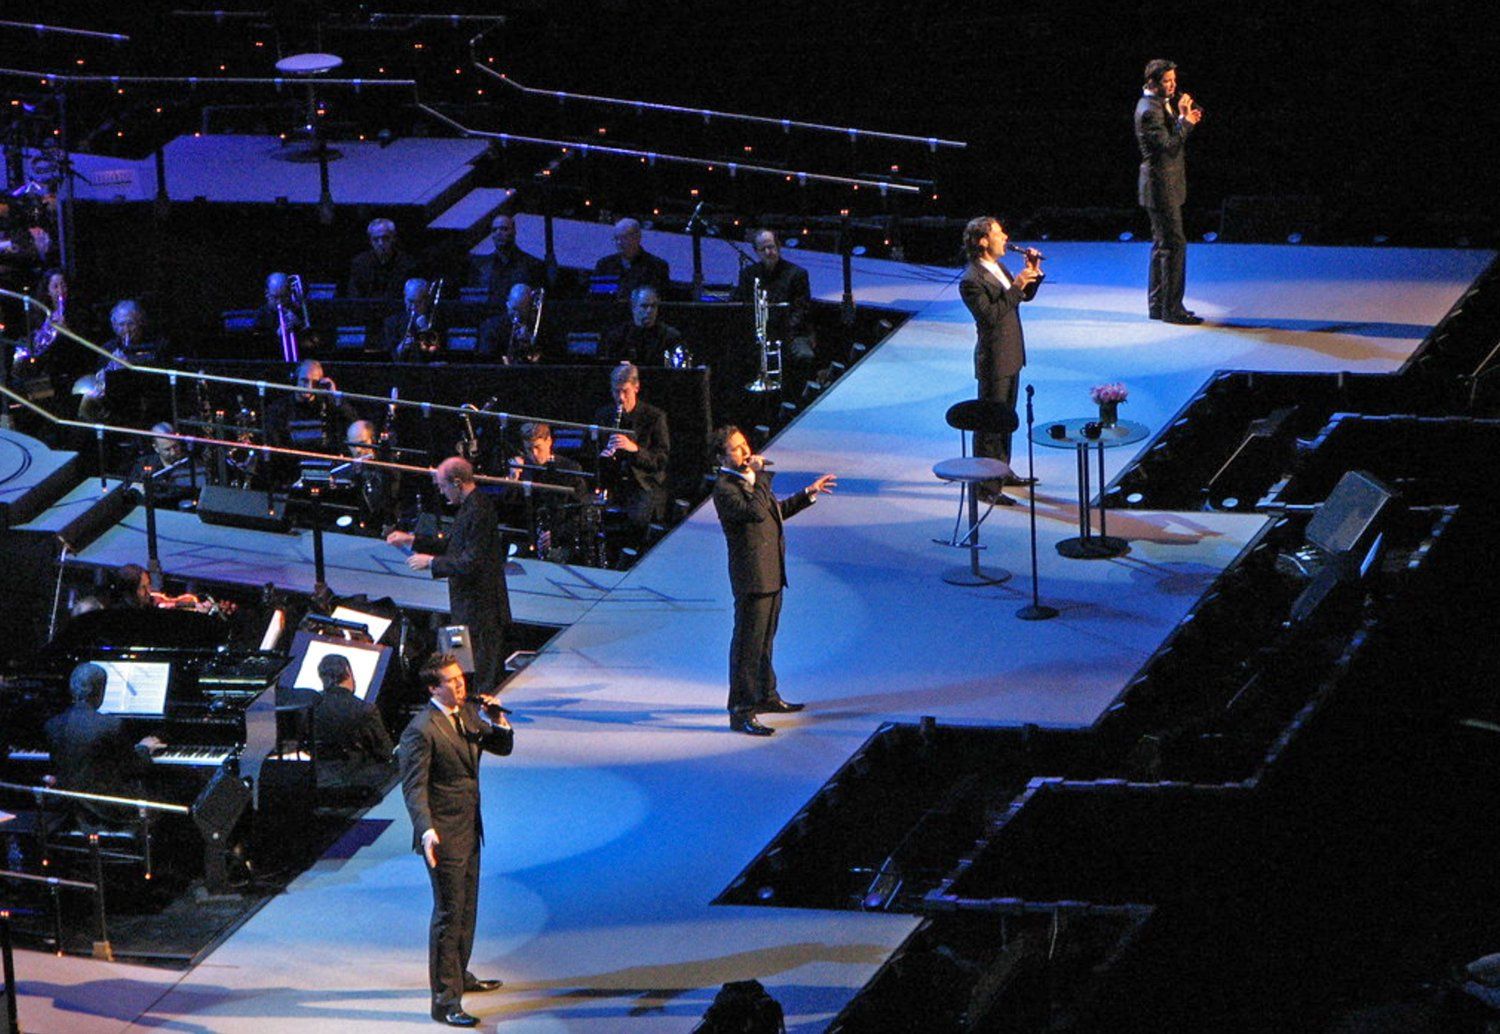 The all male opera group, Il Divo, on stage October 11, 2006.